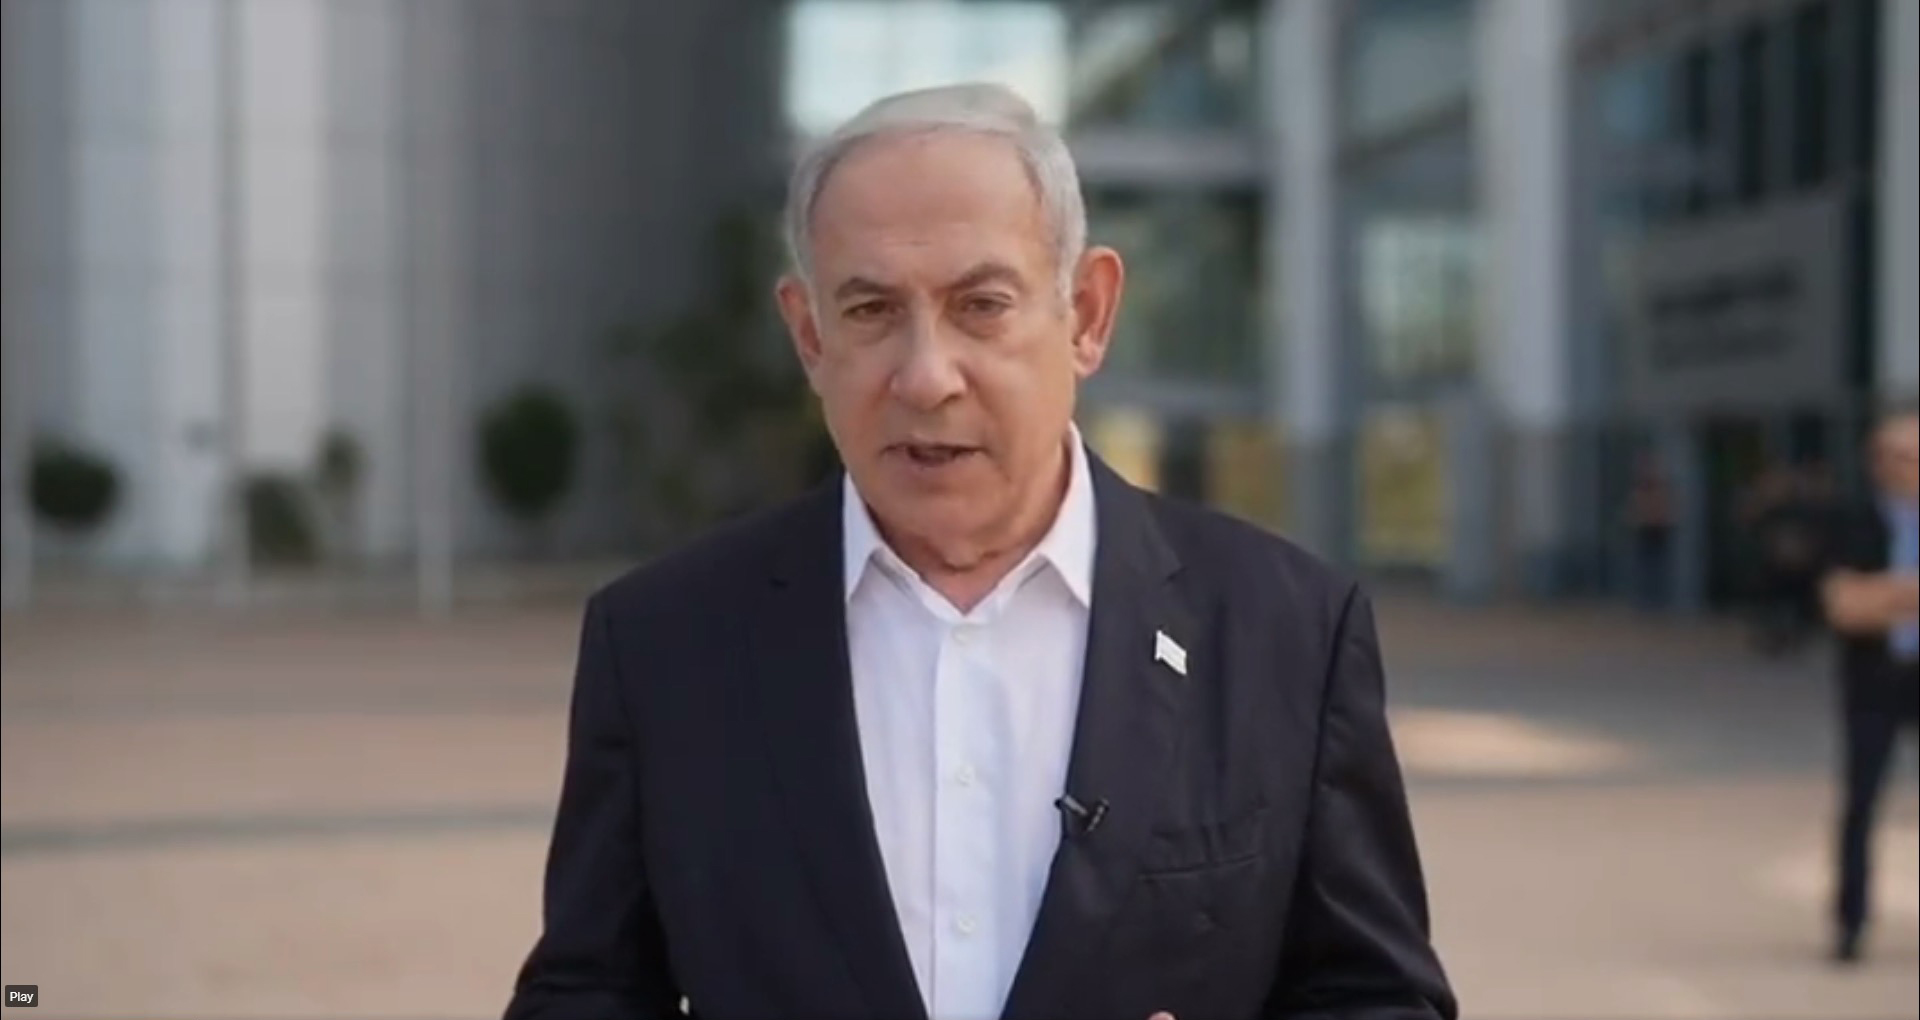 Israeli Prime Minister Benjamin Netanyahu issued a chilling warning to Hamas and swore his country would win